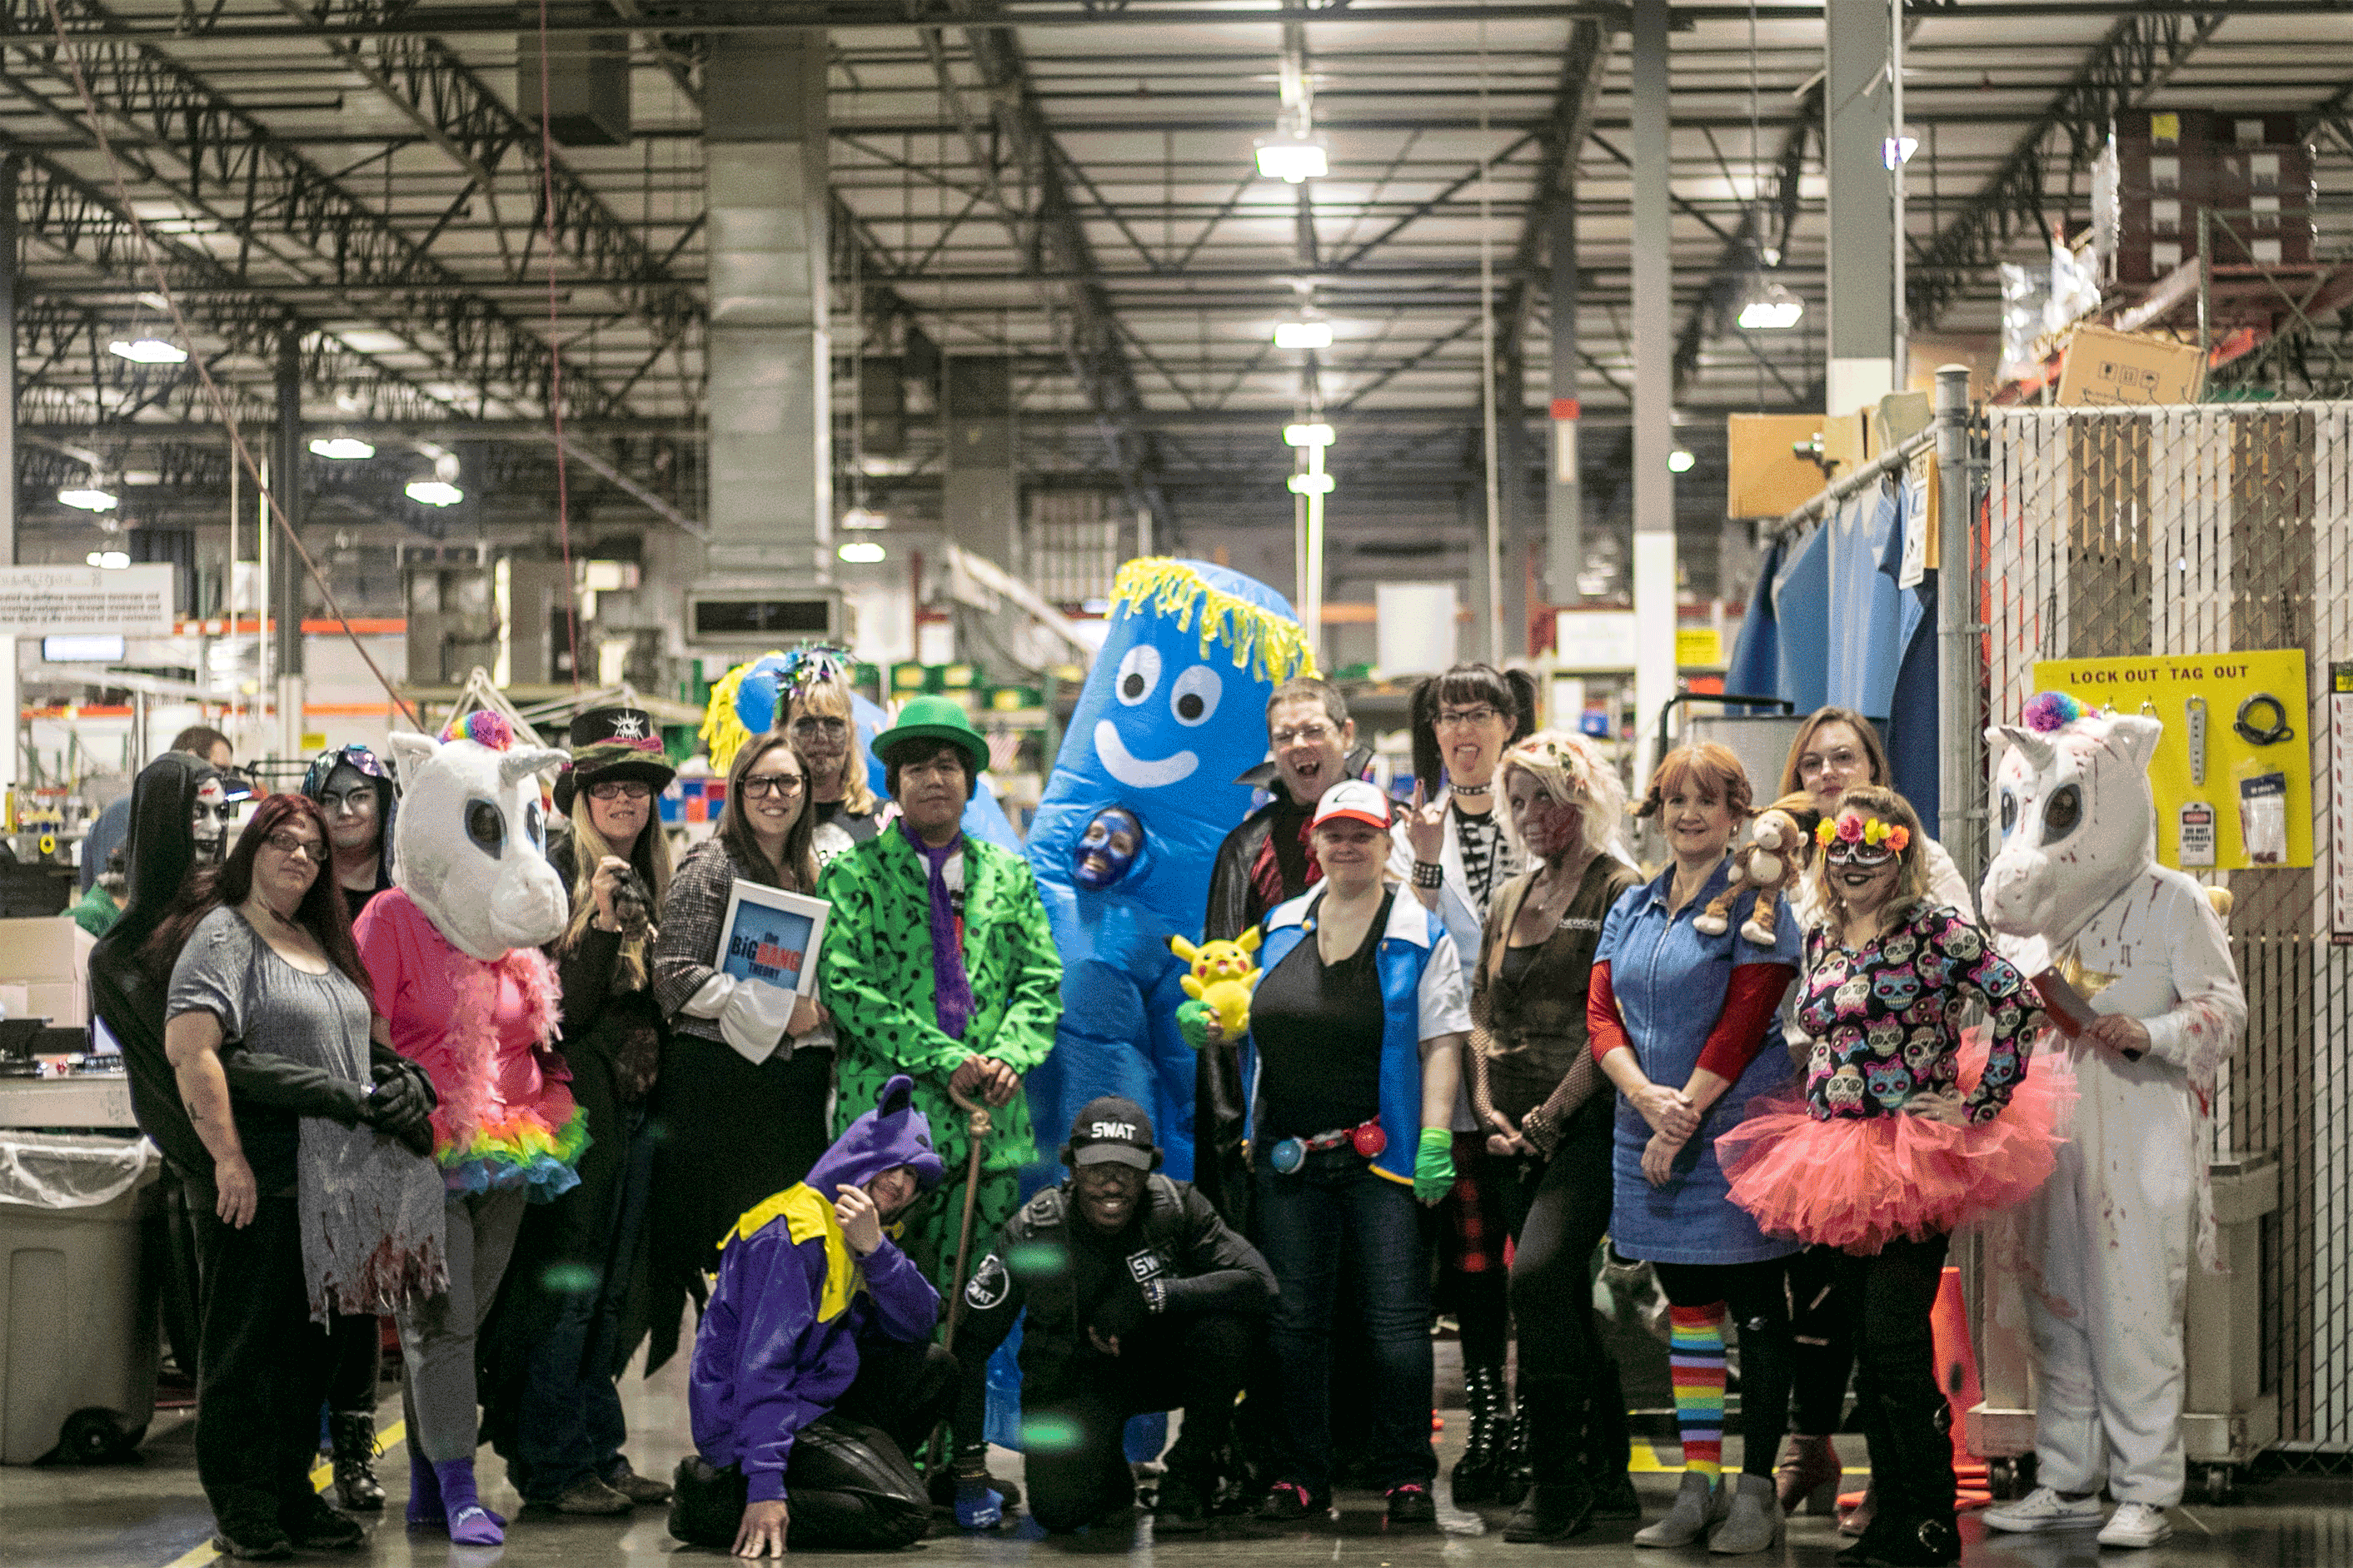 19 people in costumes for Newco Halloween Costume 2019